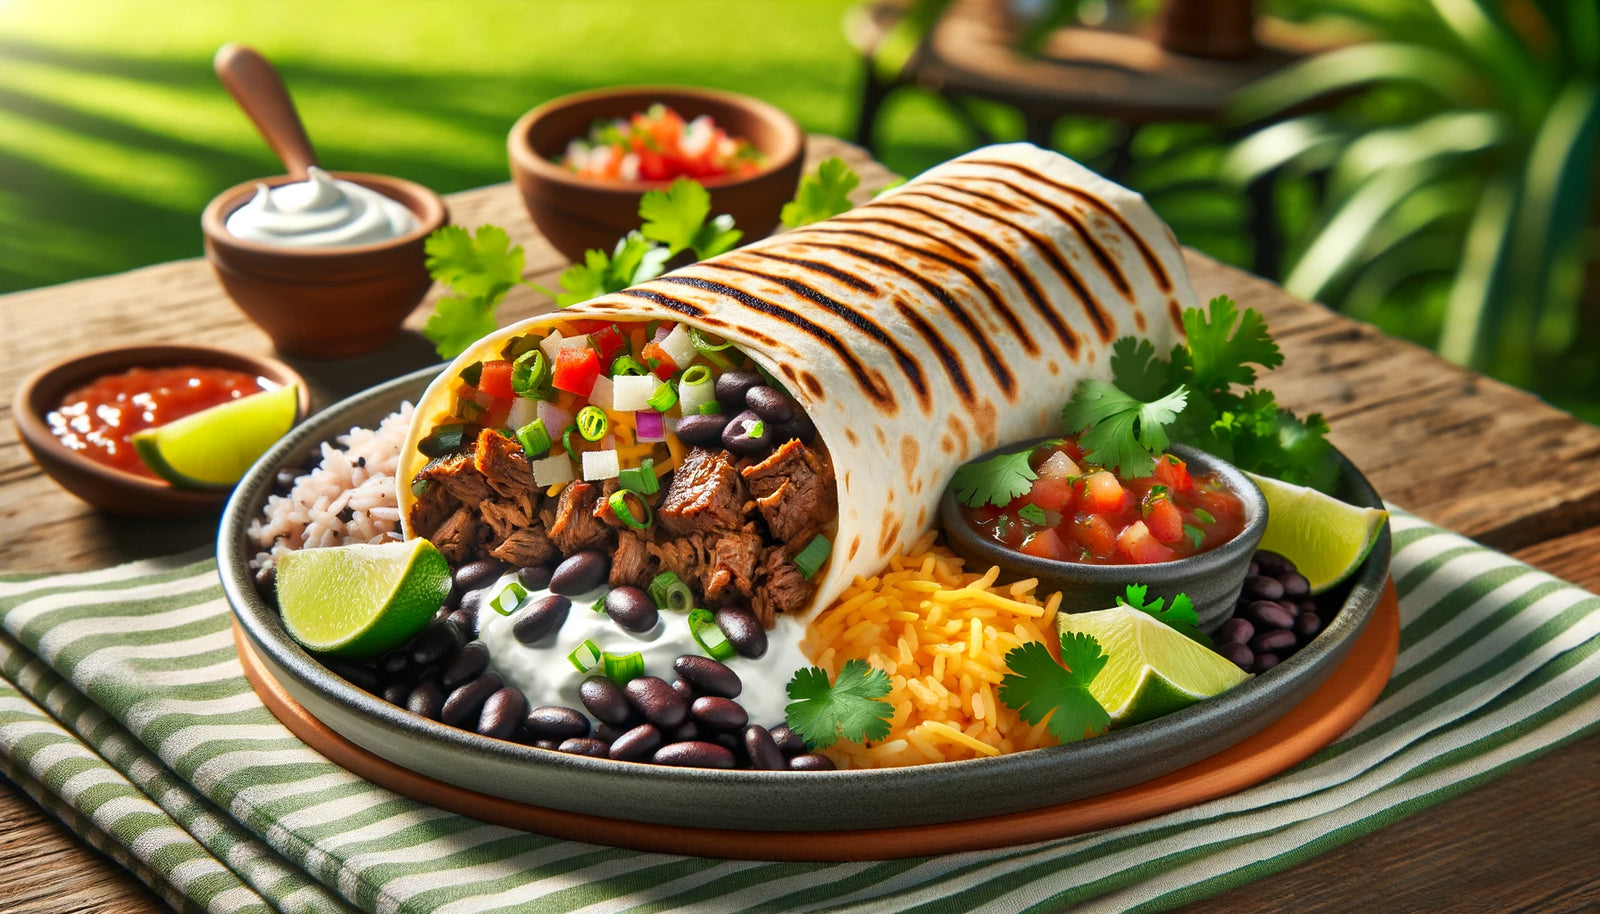 Grilled Beef Burrito Recipe on the Arteflame Grill